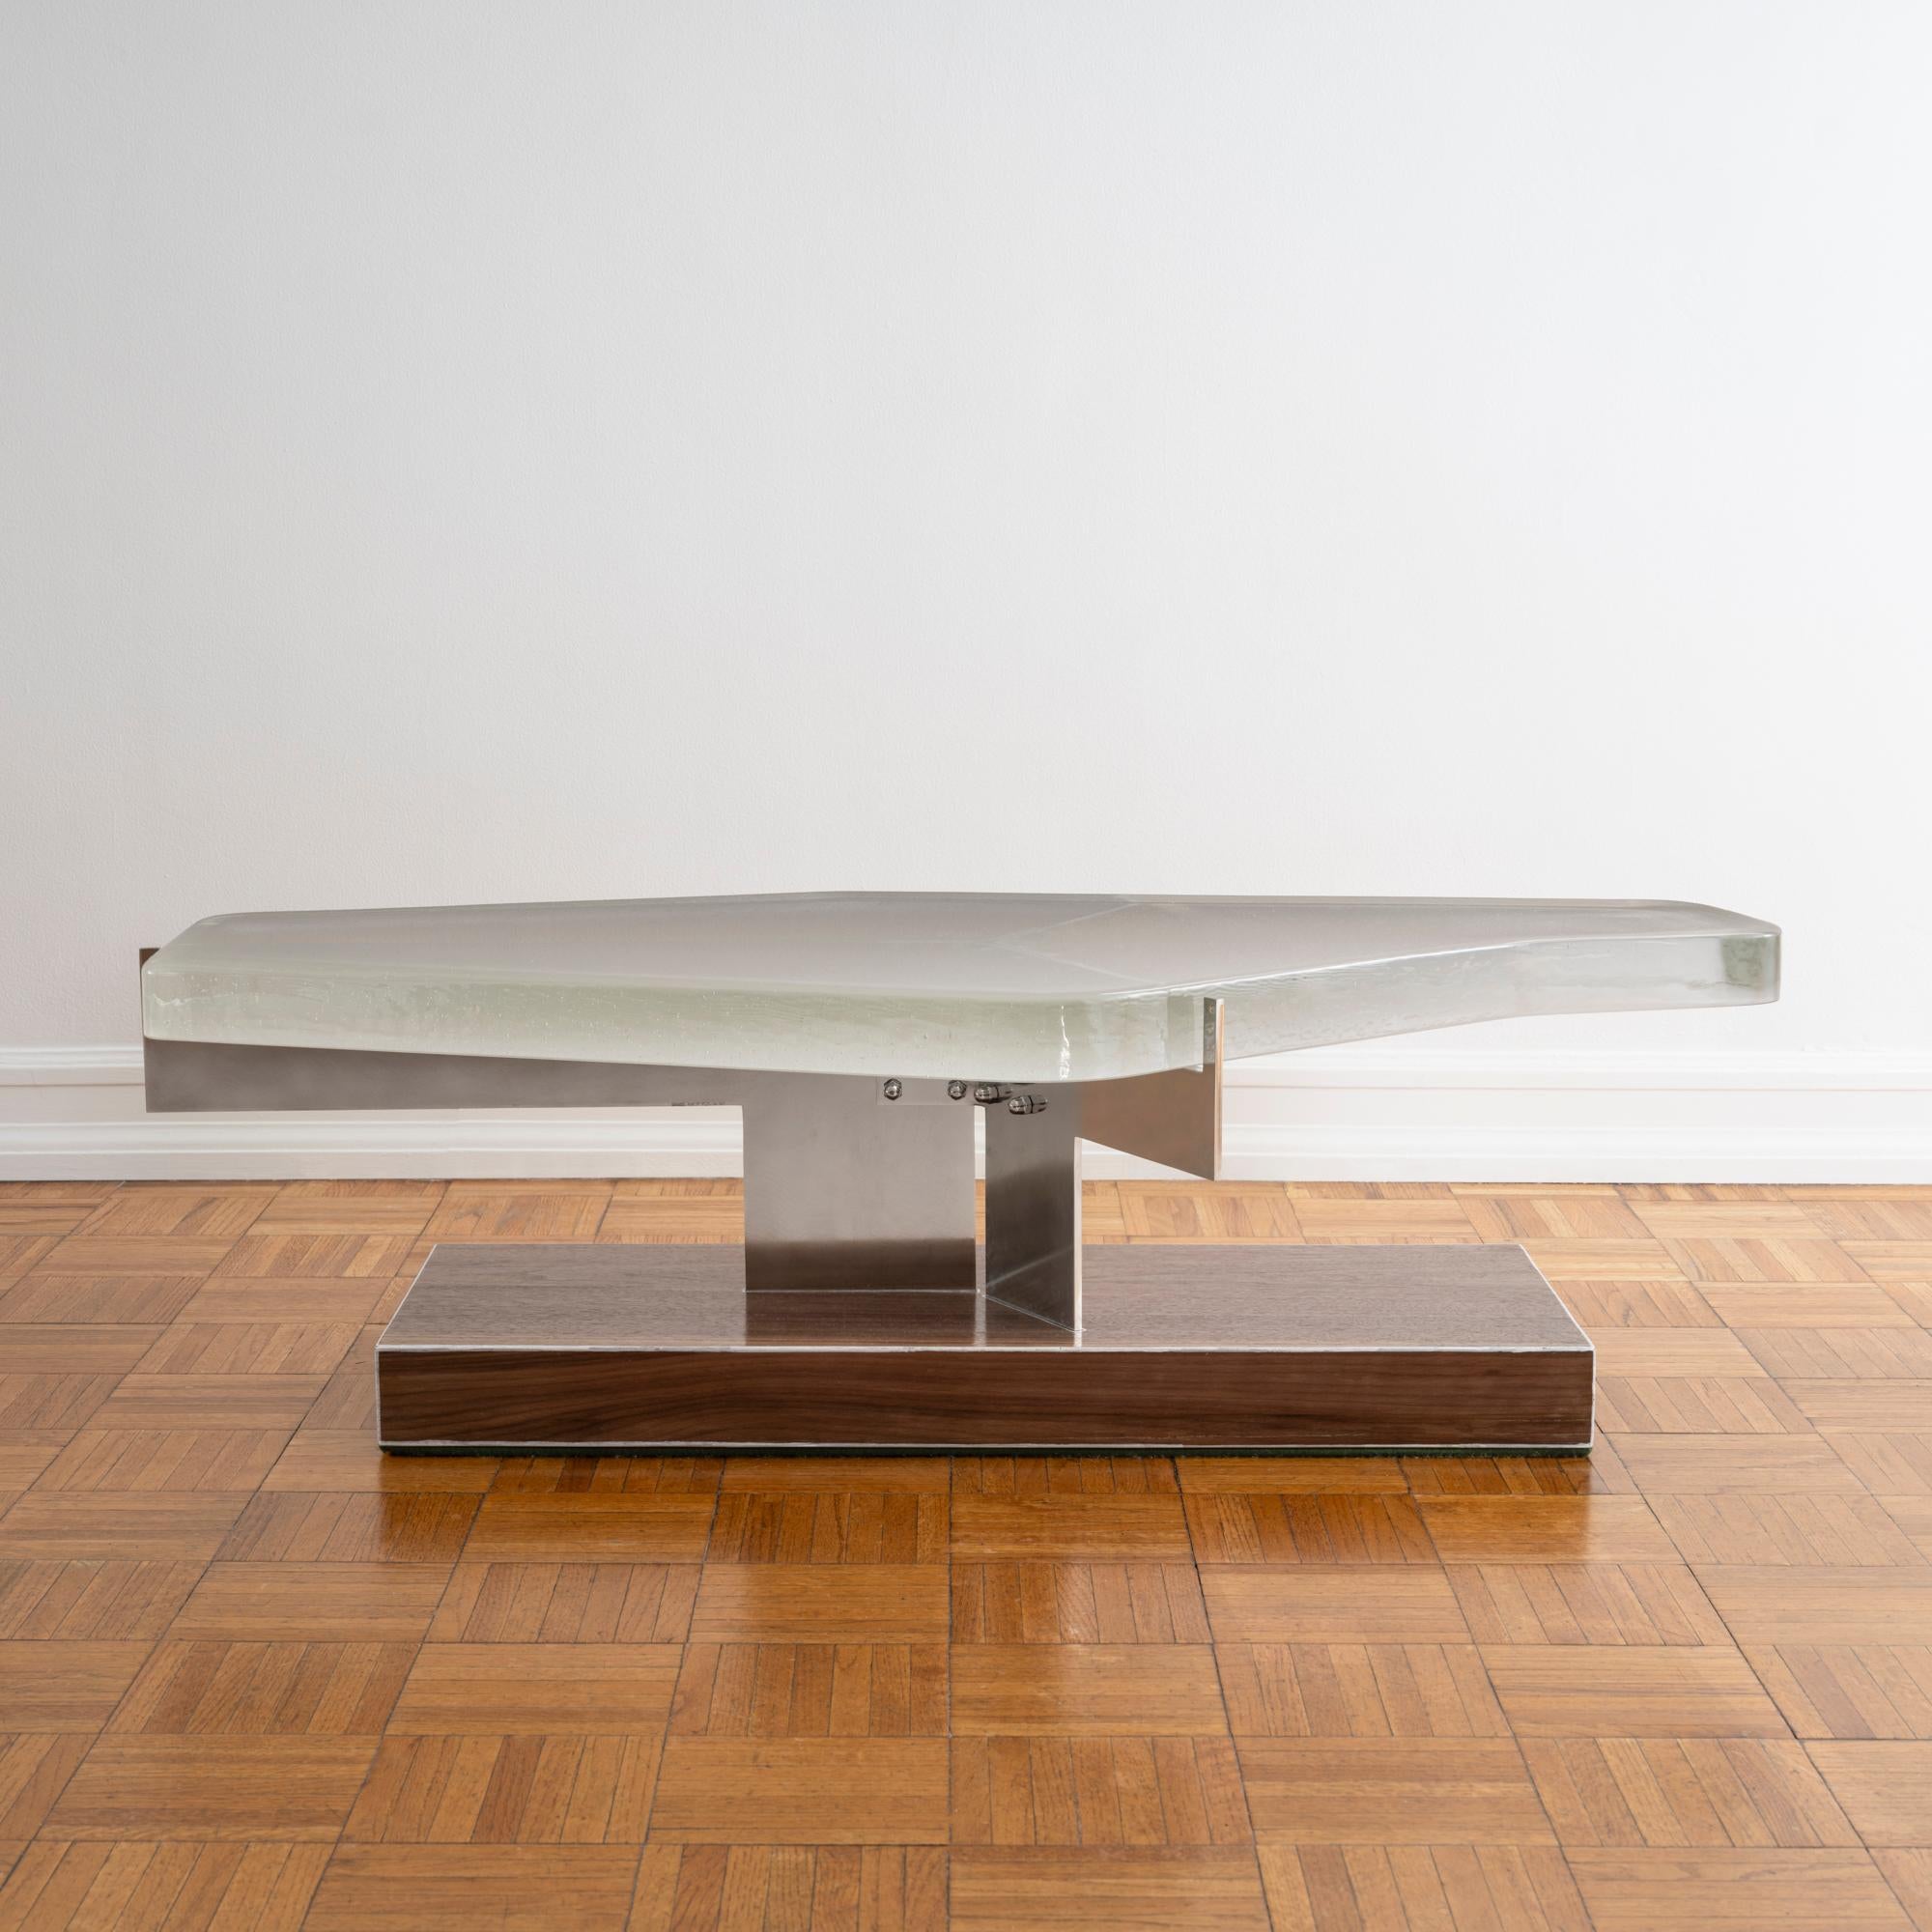 Unique, industrial and architectural coffee table composed of a cast glass slab top supported by cantilevered stainless steel atop a rectangular base in walnut veneered birch wood by London-based designer EJR Barnes. 

This piece creates a